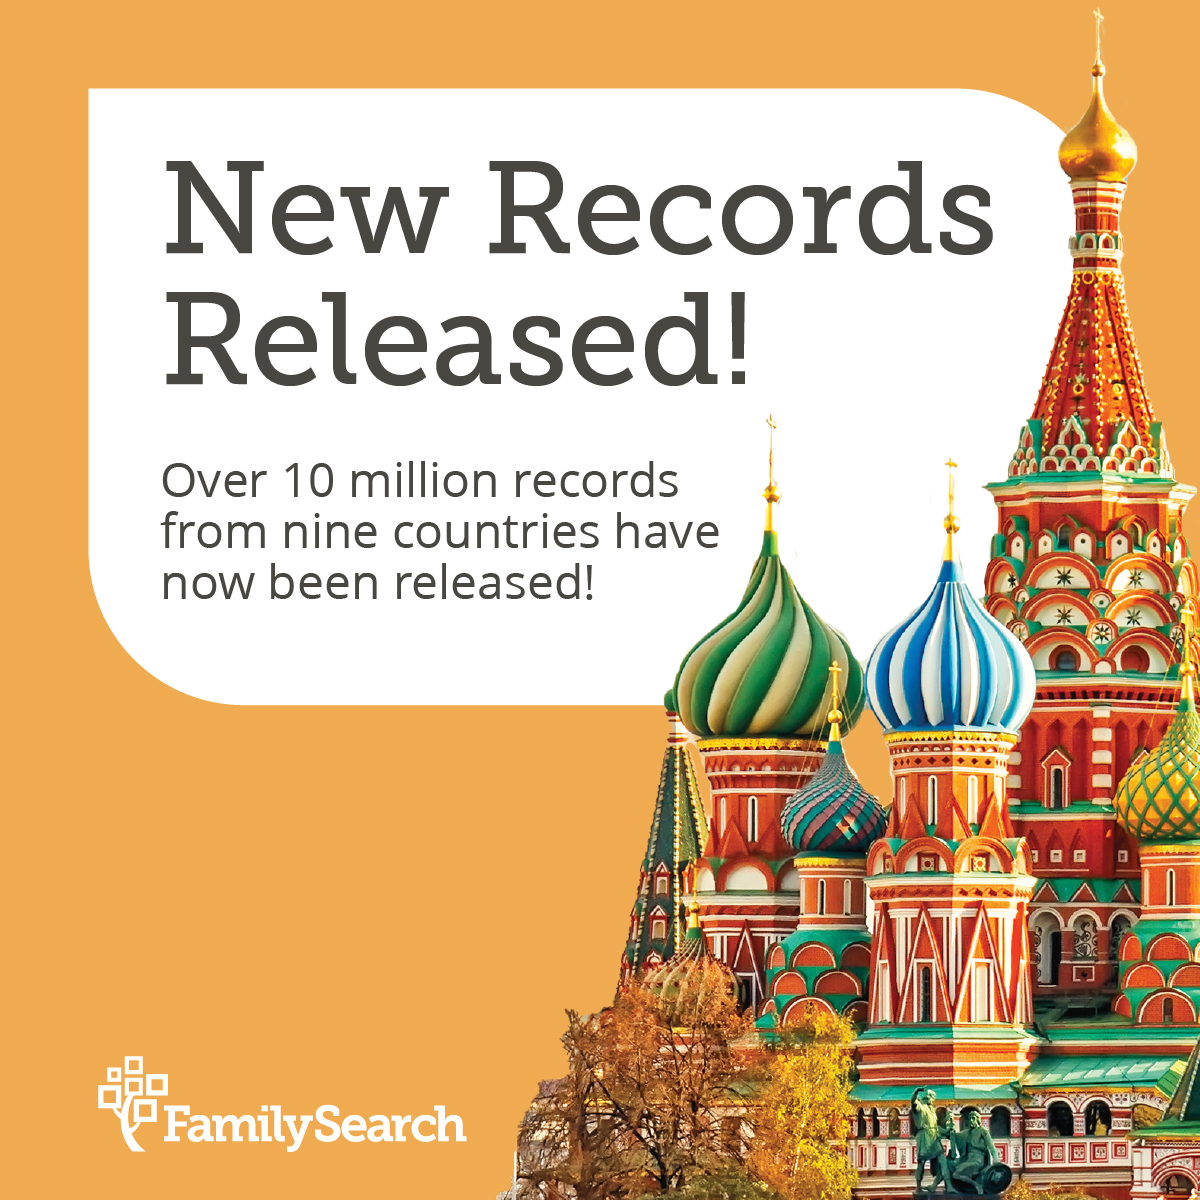 FamilySearch has added over 10 million FREE records to the archives! Deep dive into these records by clicking the link: familysearch.org/en/blog/new-re…